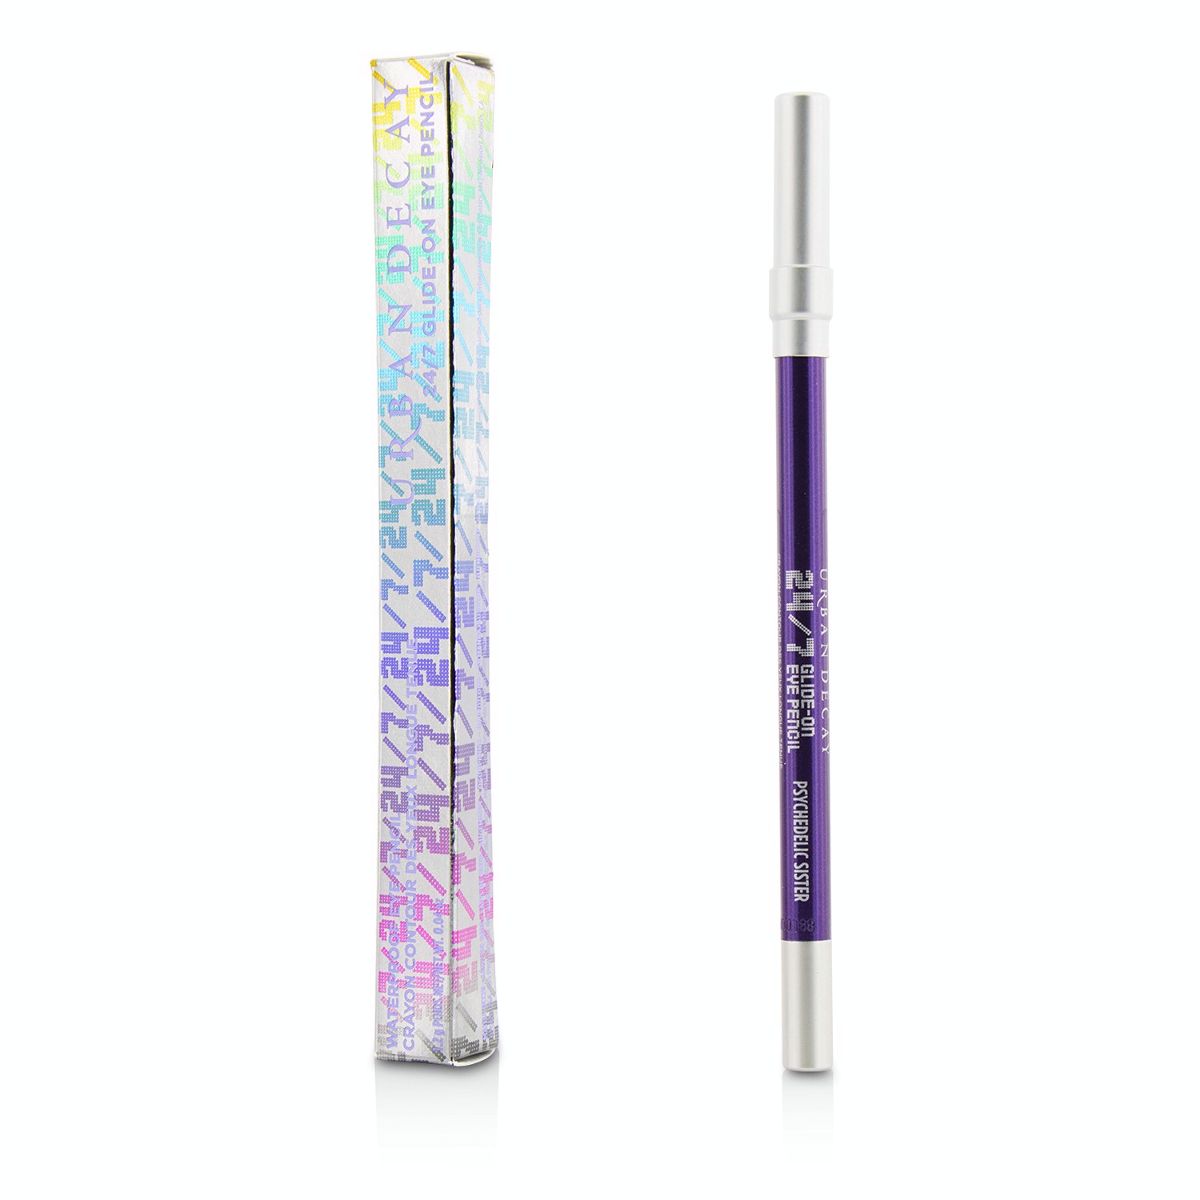 24/7 Glide On Waterproof Eye Pencil - Psychedelic Sister Urban Decay Image